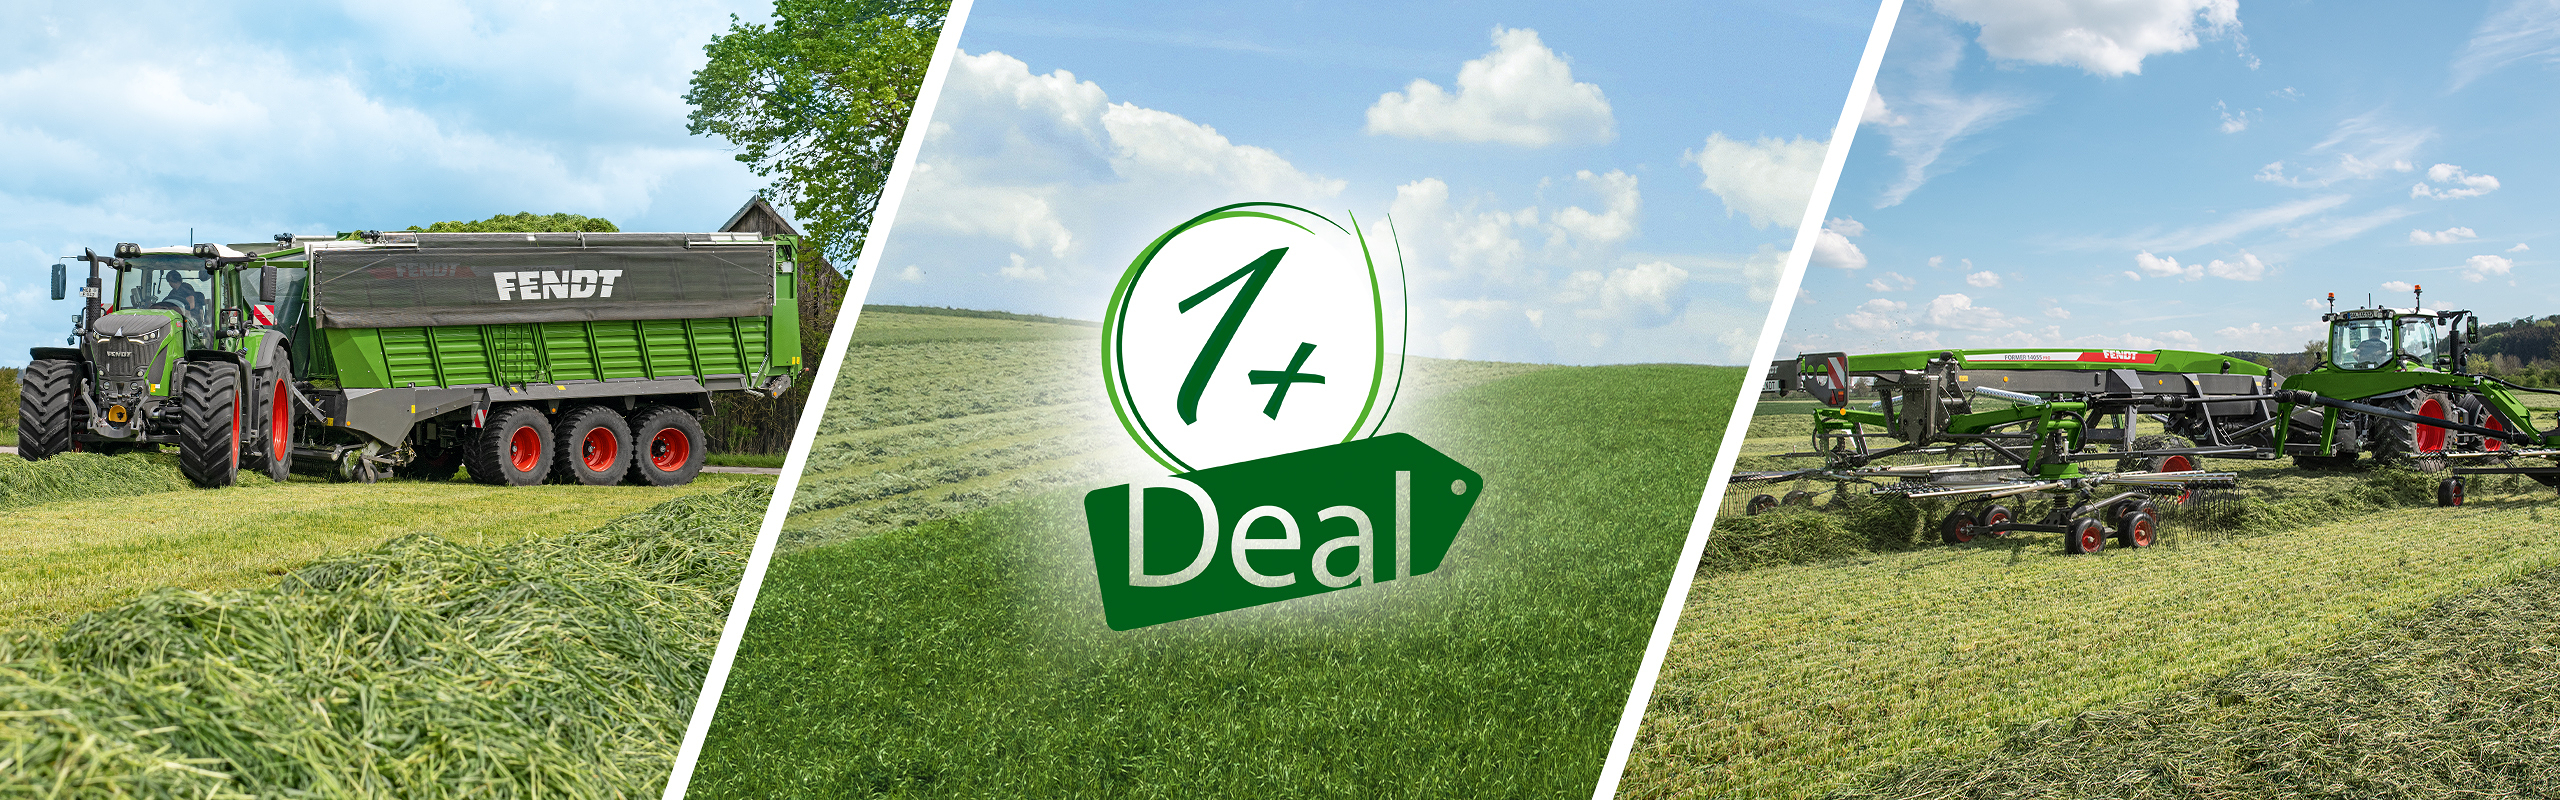 On the left you can see a loader wagon and on the right a Fendt rake in the meadow. In the centre is the 1+ Deal logo.